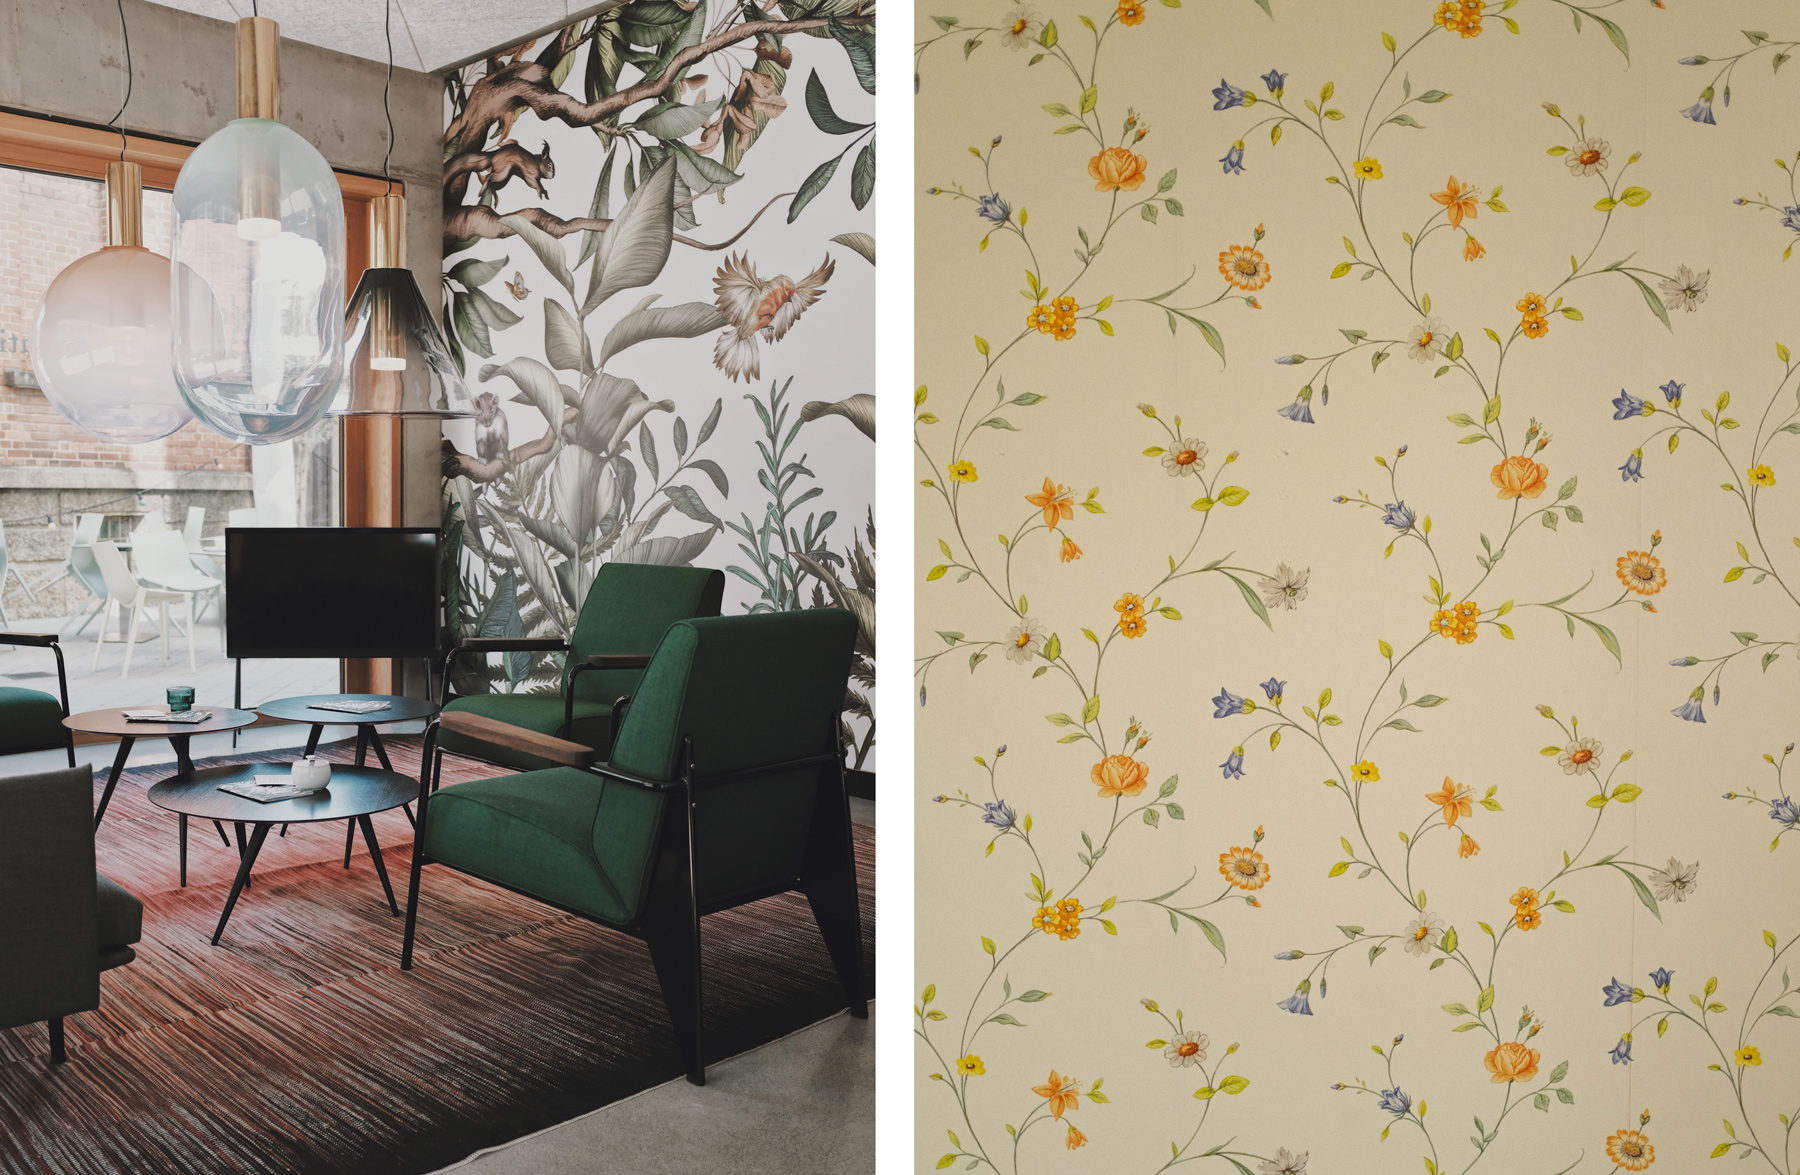 Two wall solutions with floral patterns